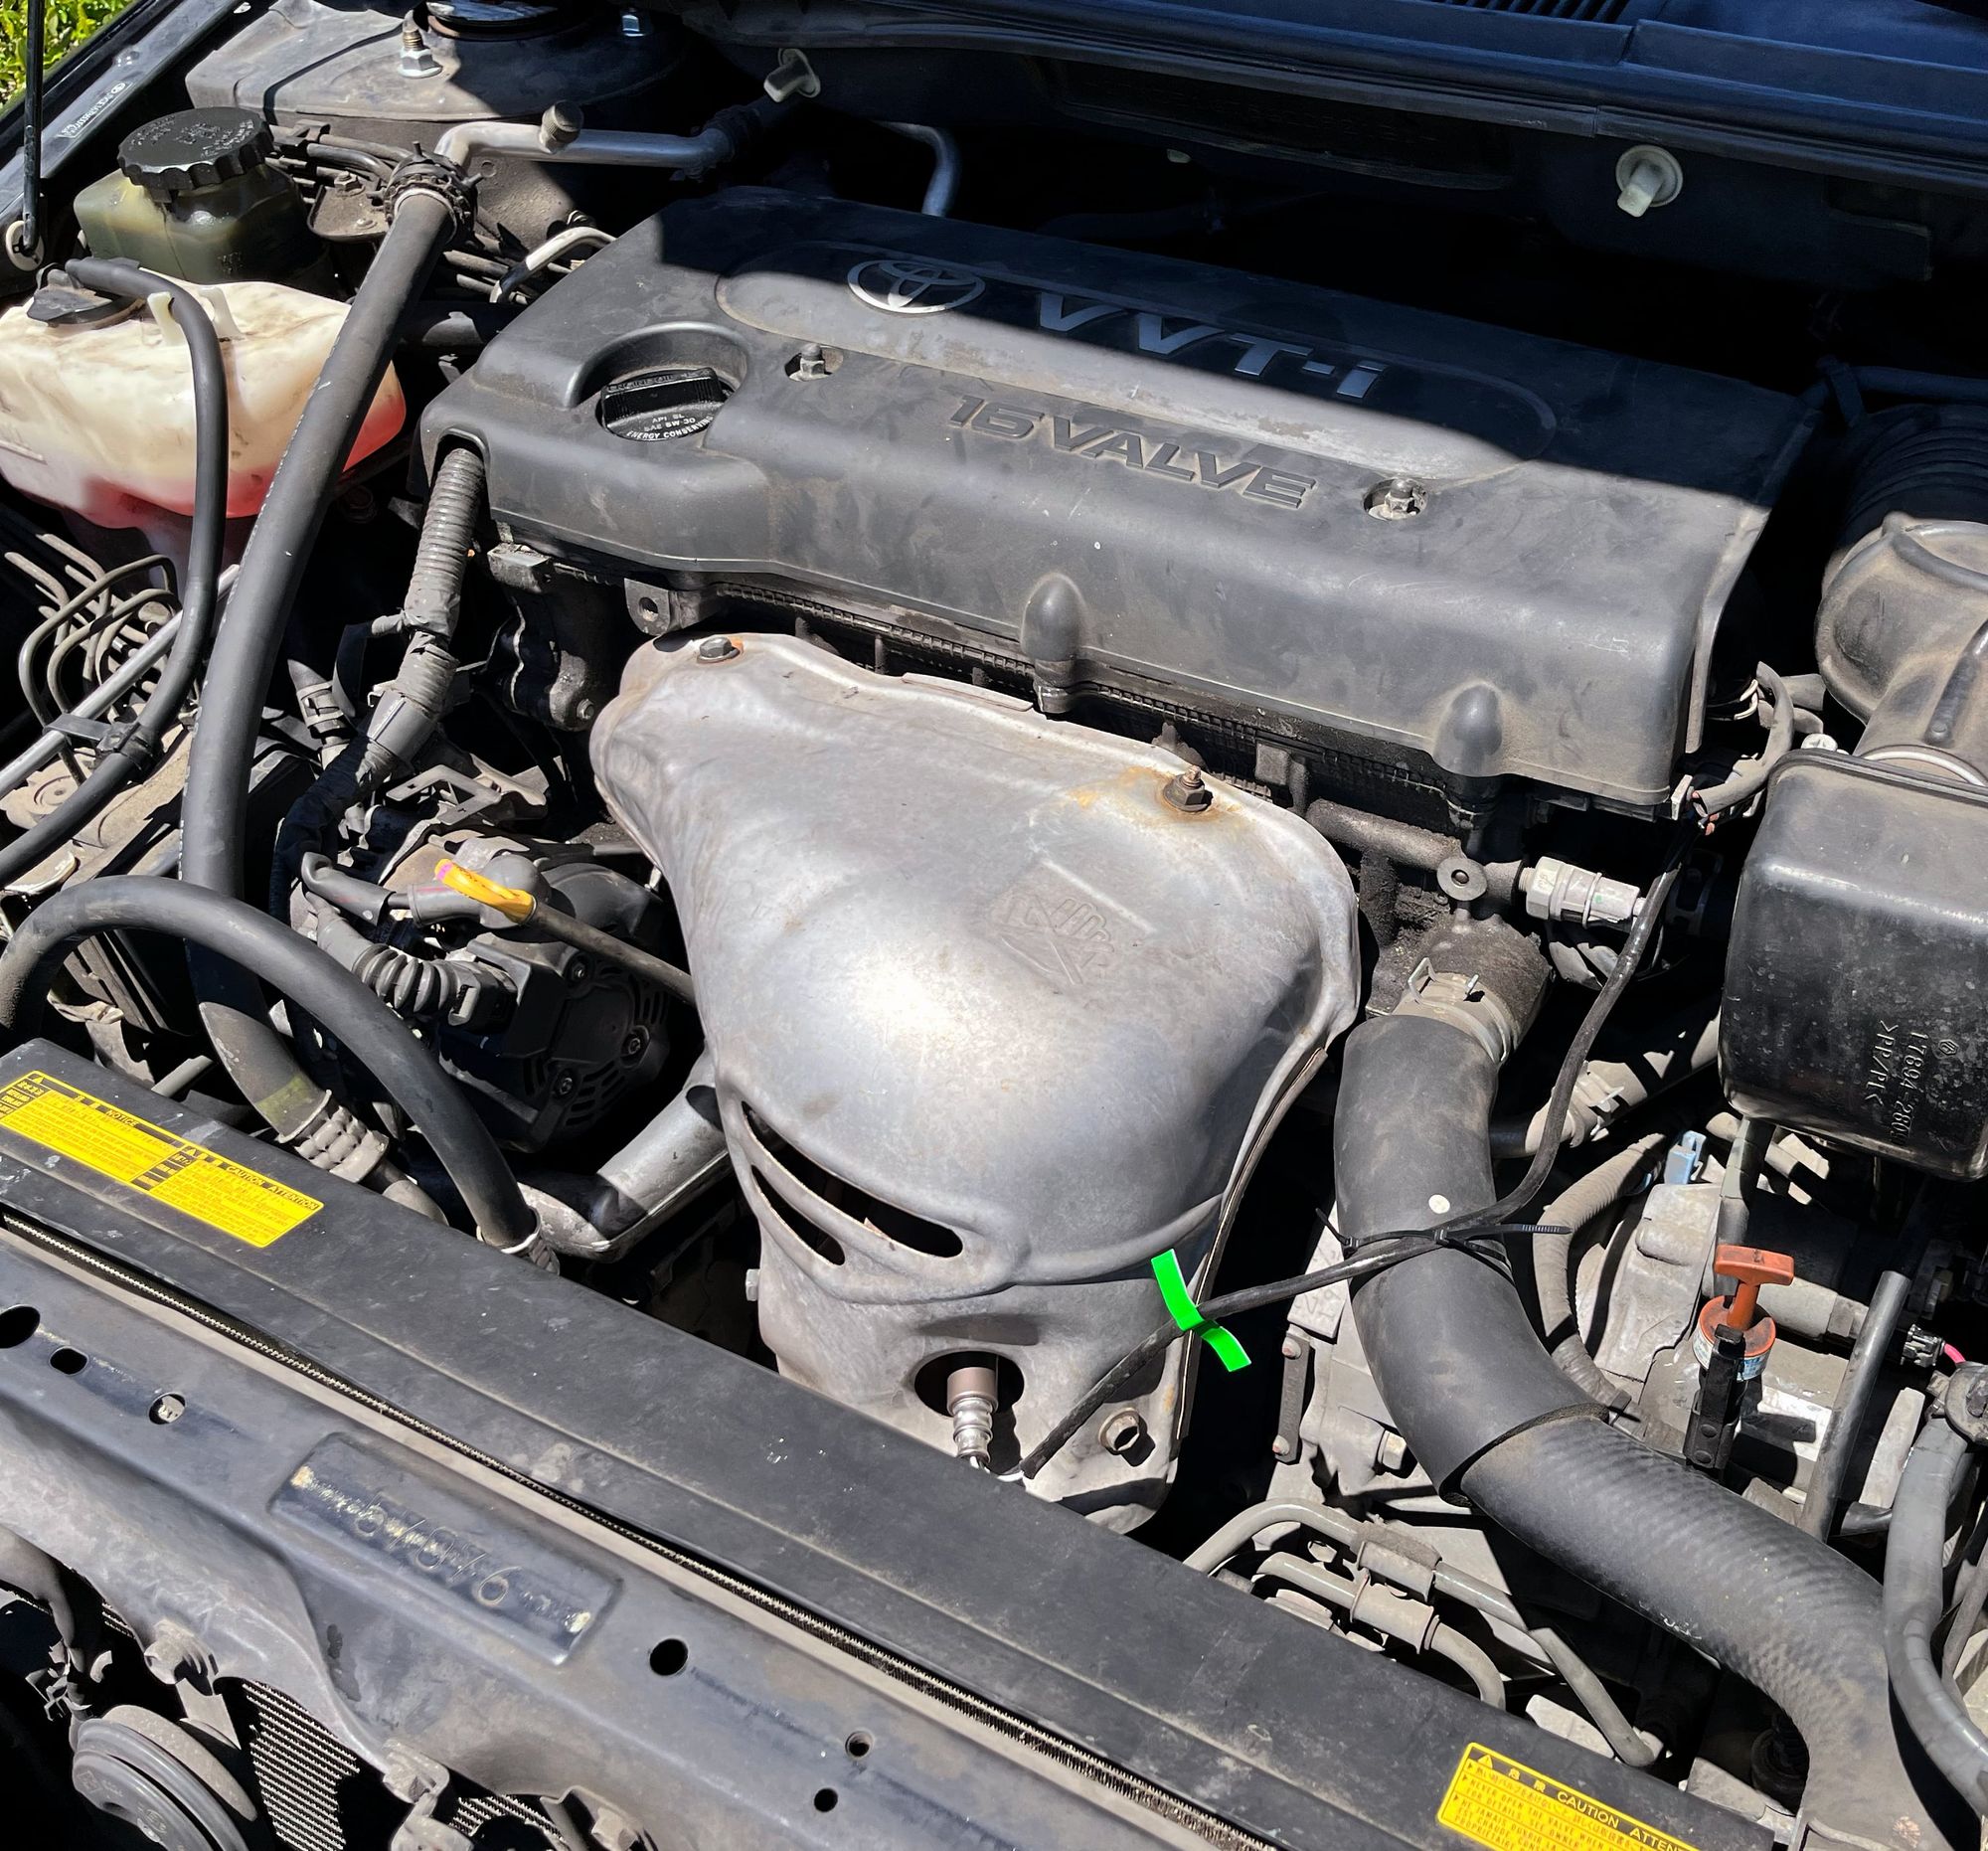 The engine compartment of a car.